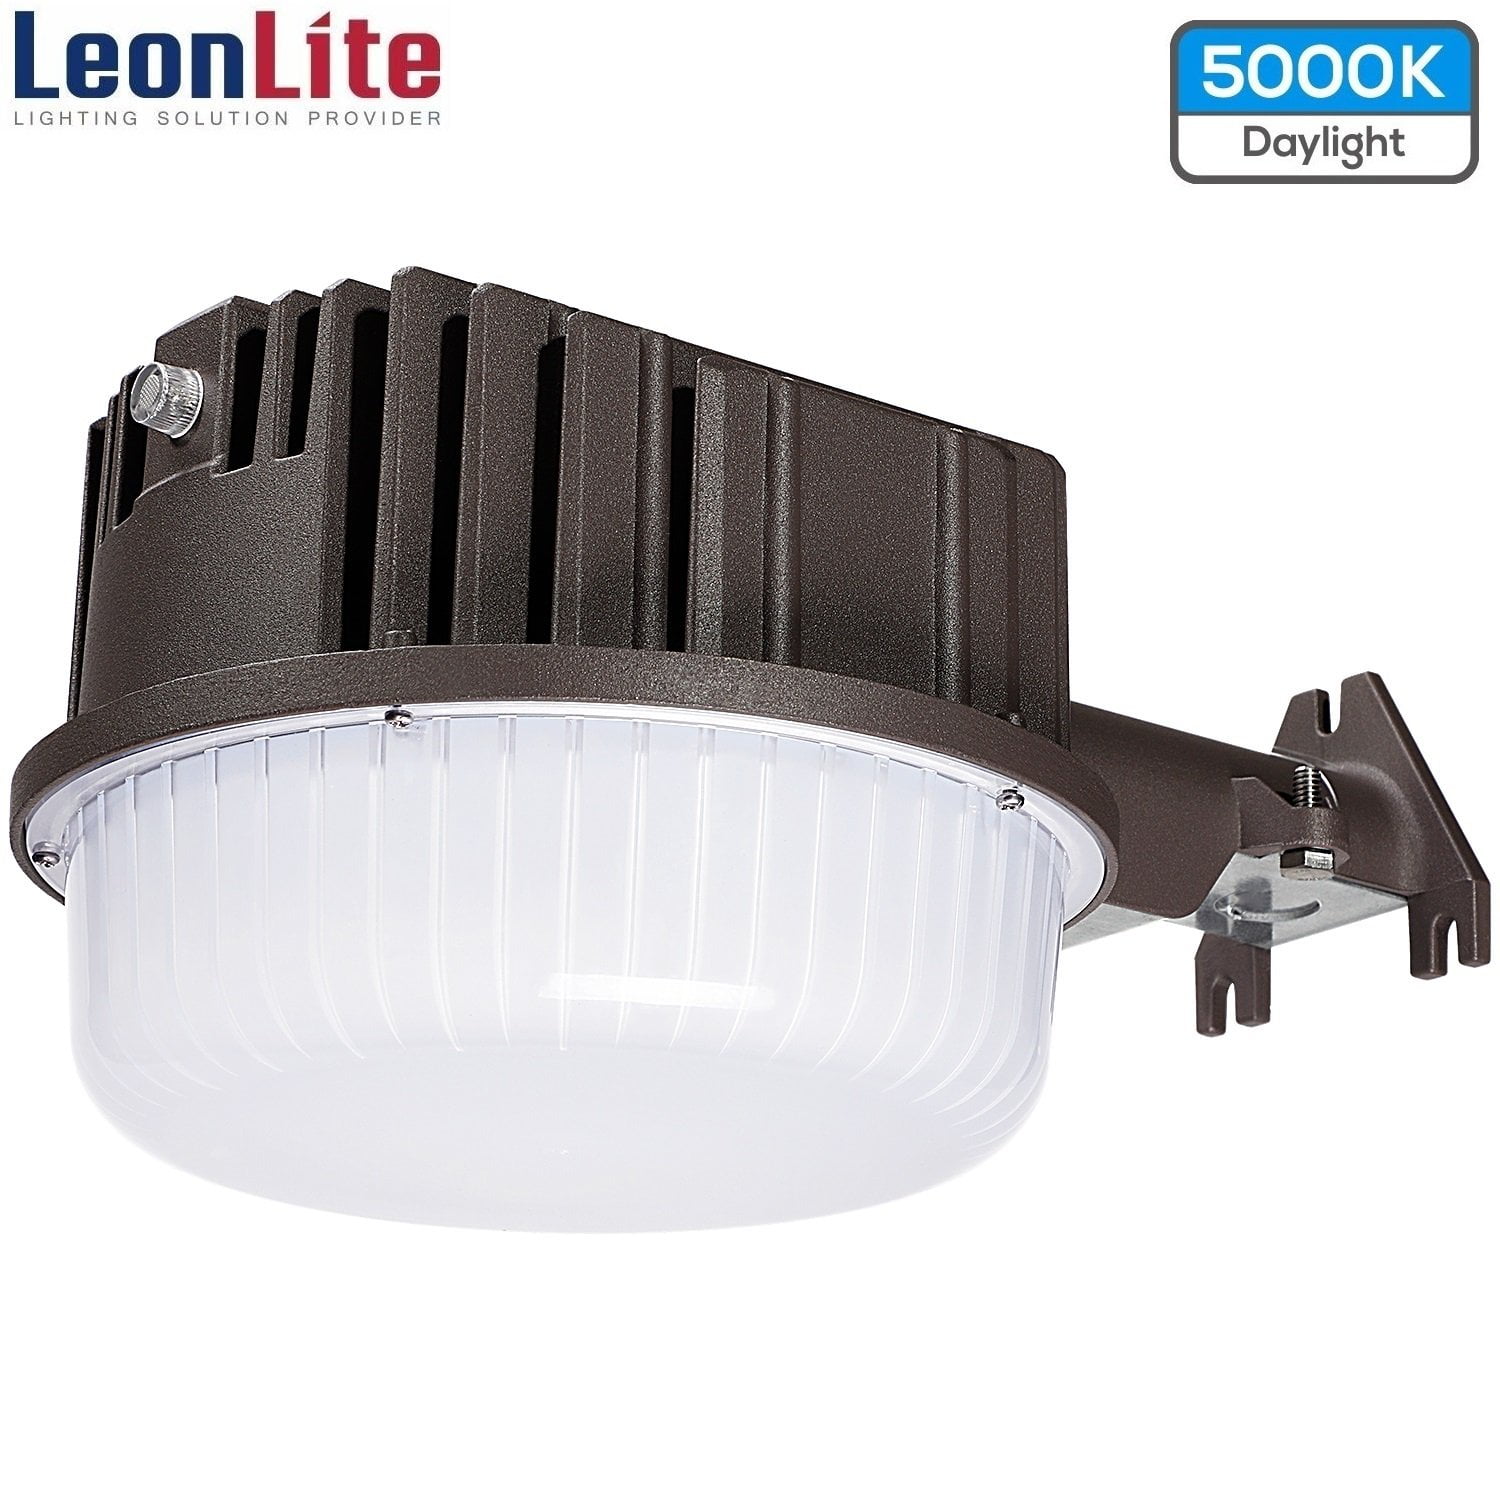 Details about   LED Barn Yard Street Outdoor Security Light Dusk to Dawn Waterproof Flood light 